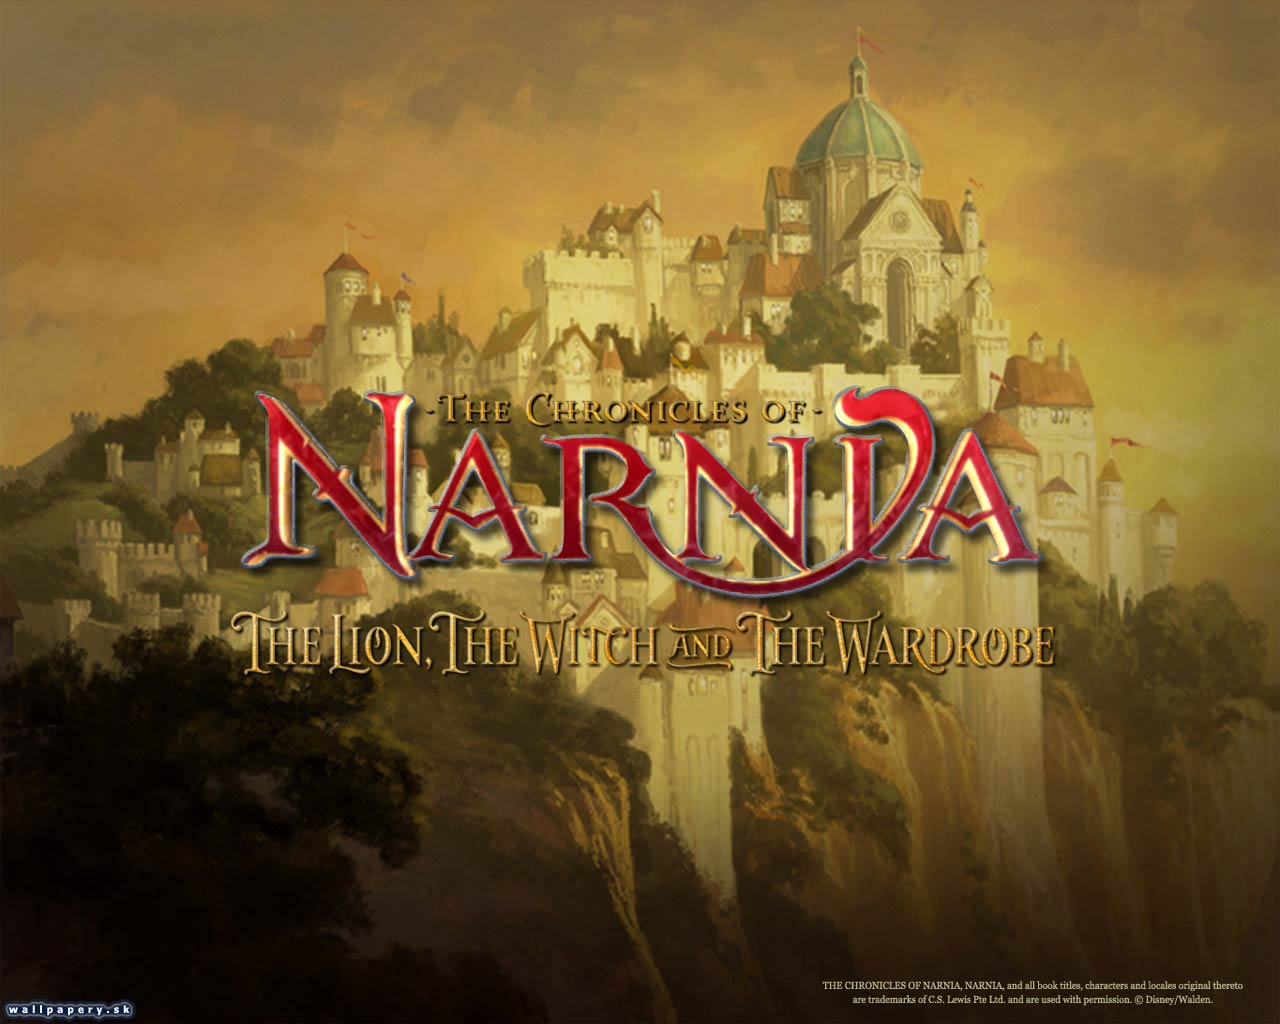 The Chronicles of Narnia: The Lion, The Witch and the Wardrobe - wallpaper 14